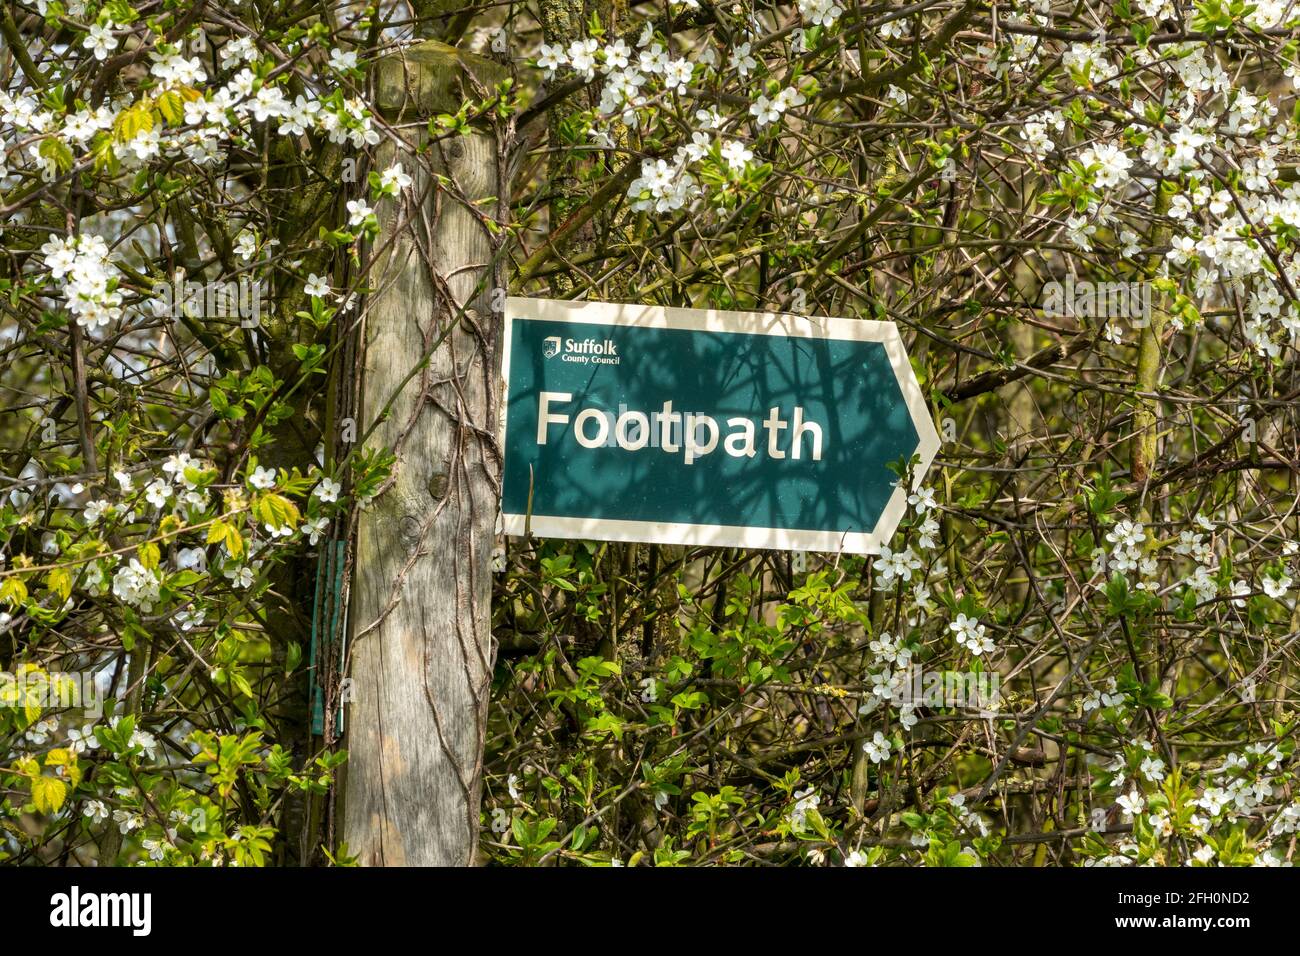 Footpath sign with directional pointer partly obscured by undergrowth in a rural location Stock Photo